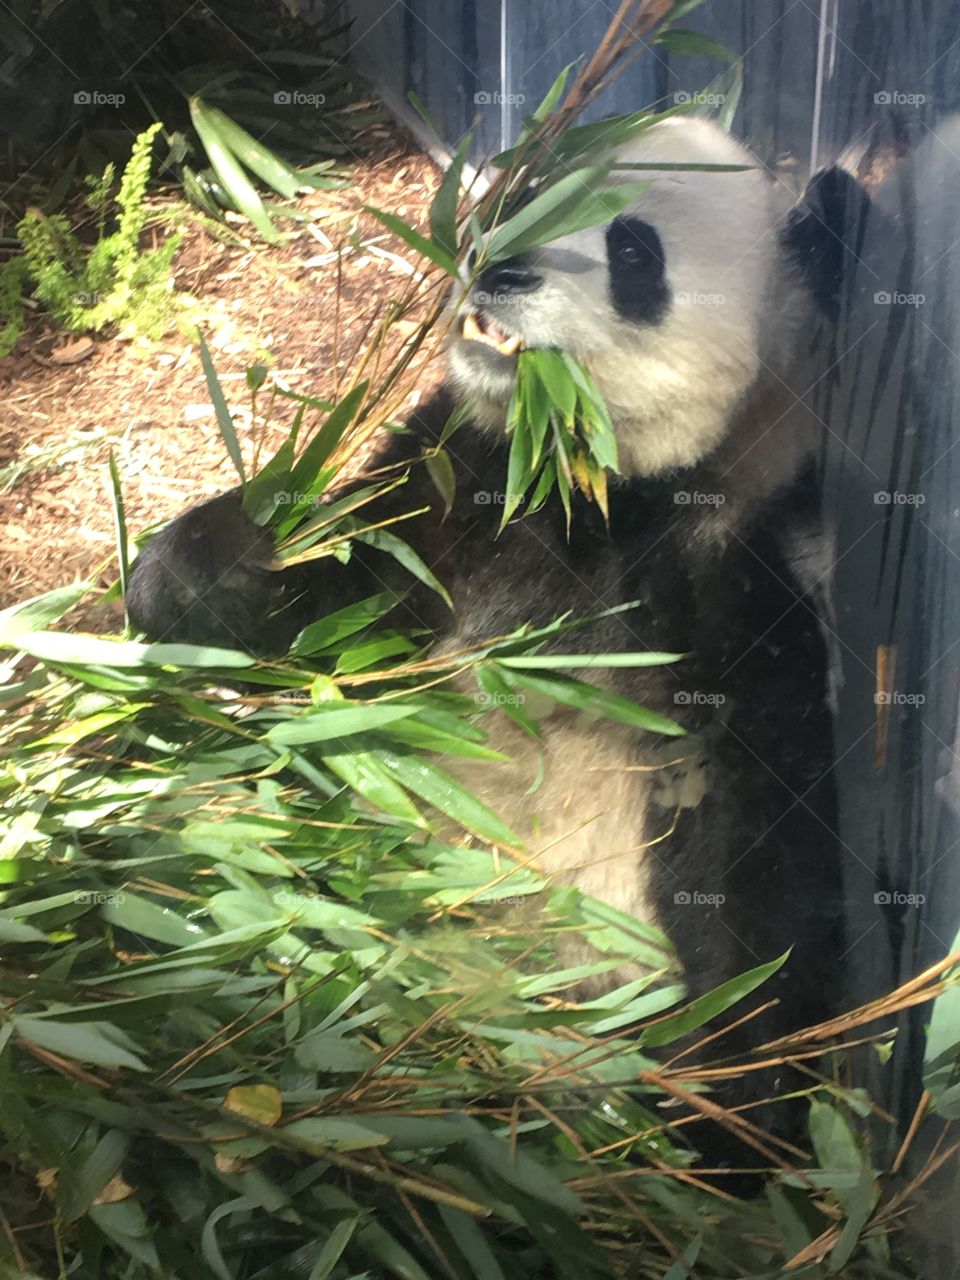 Panda feasting on bamboo at the zoo. 